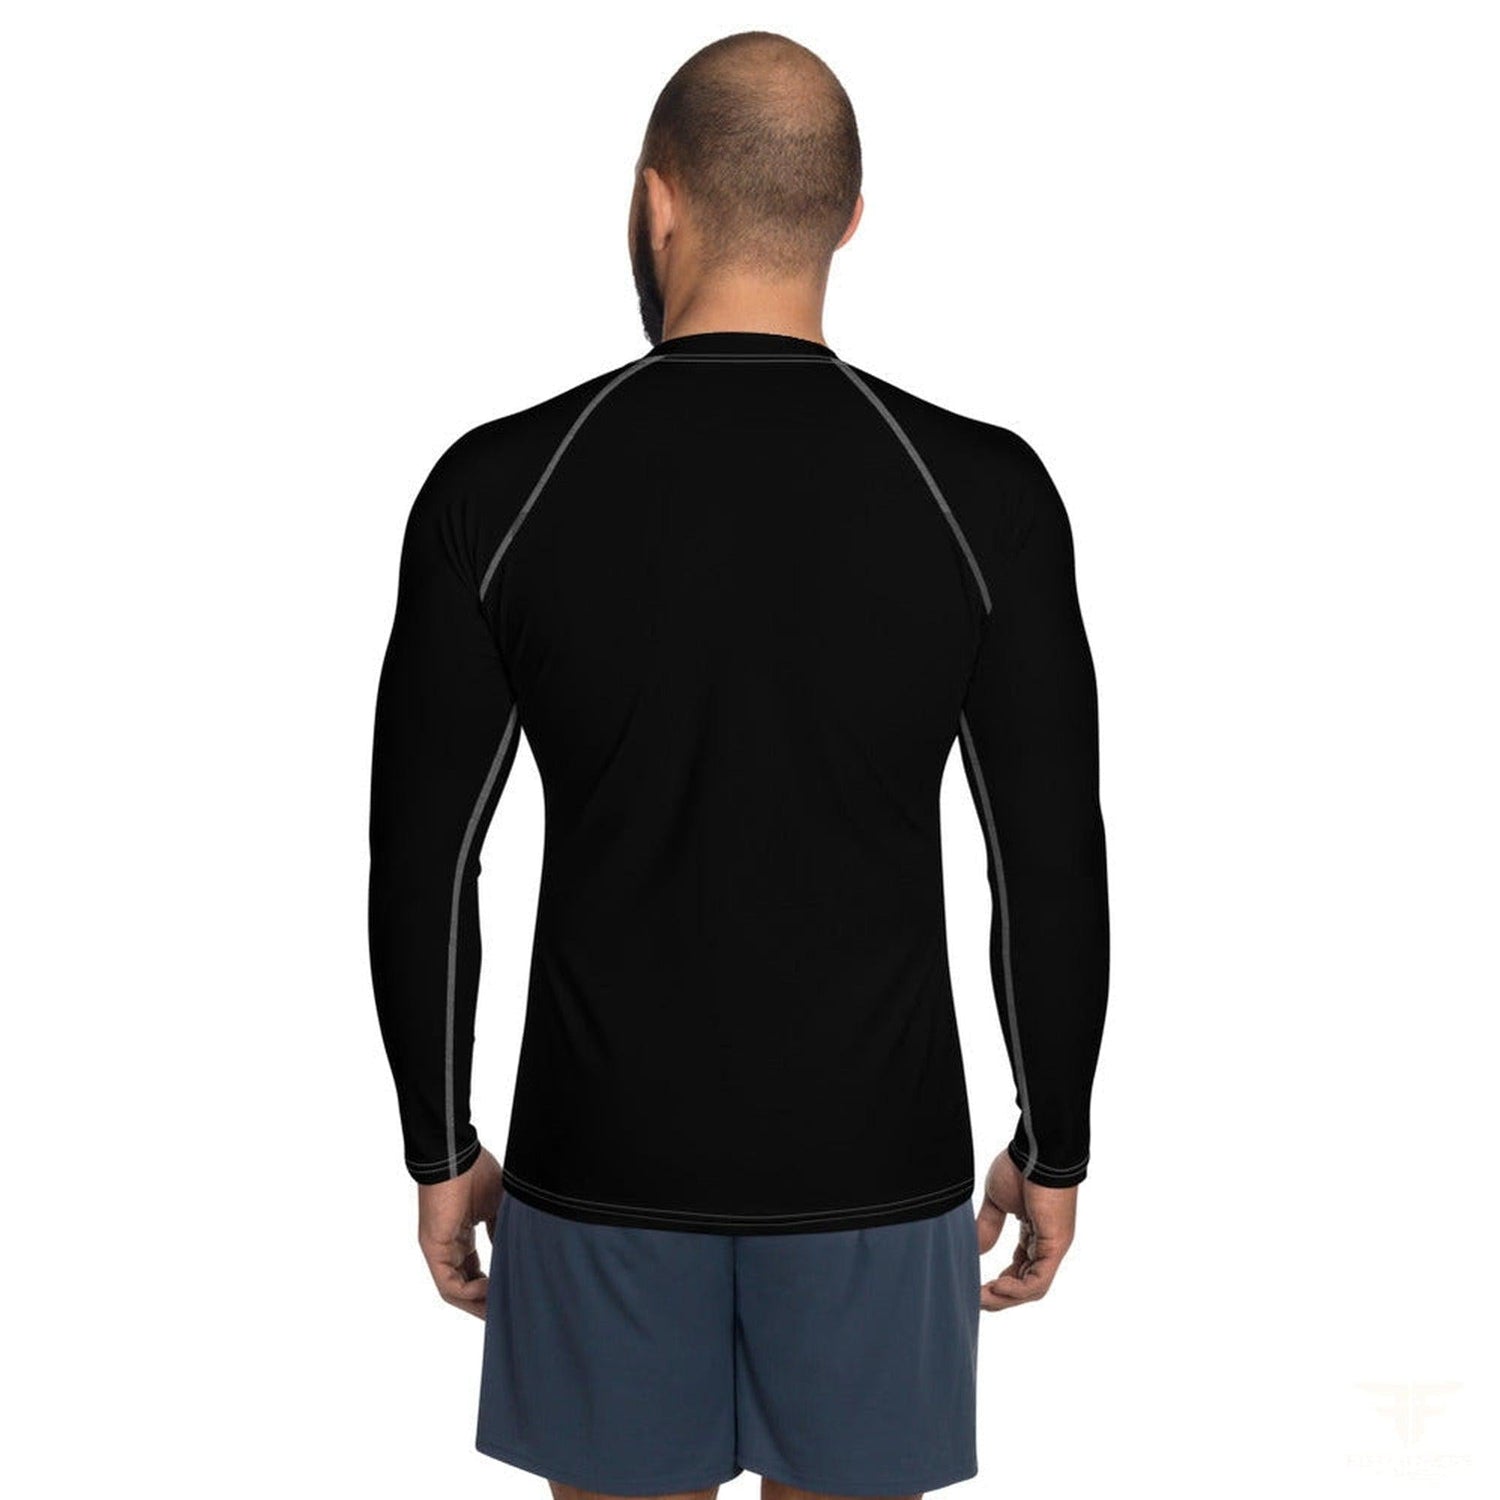 Rash Guard - For Fathers Fitness